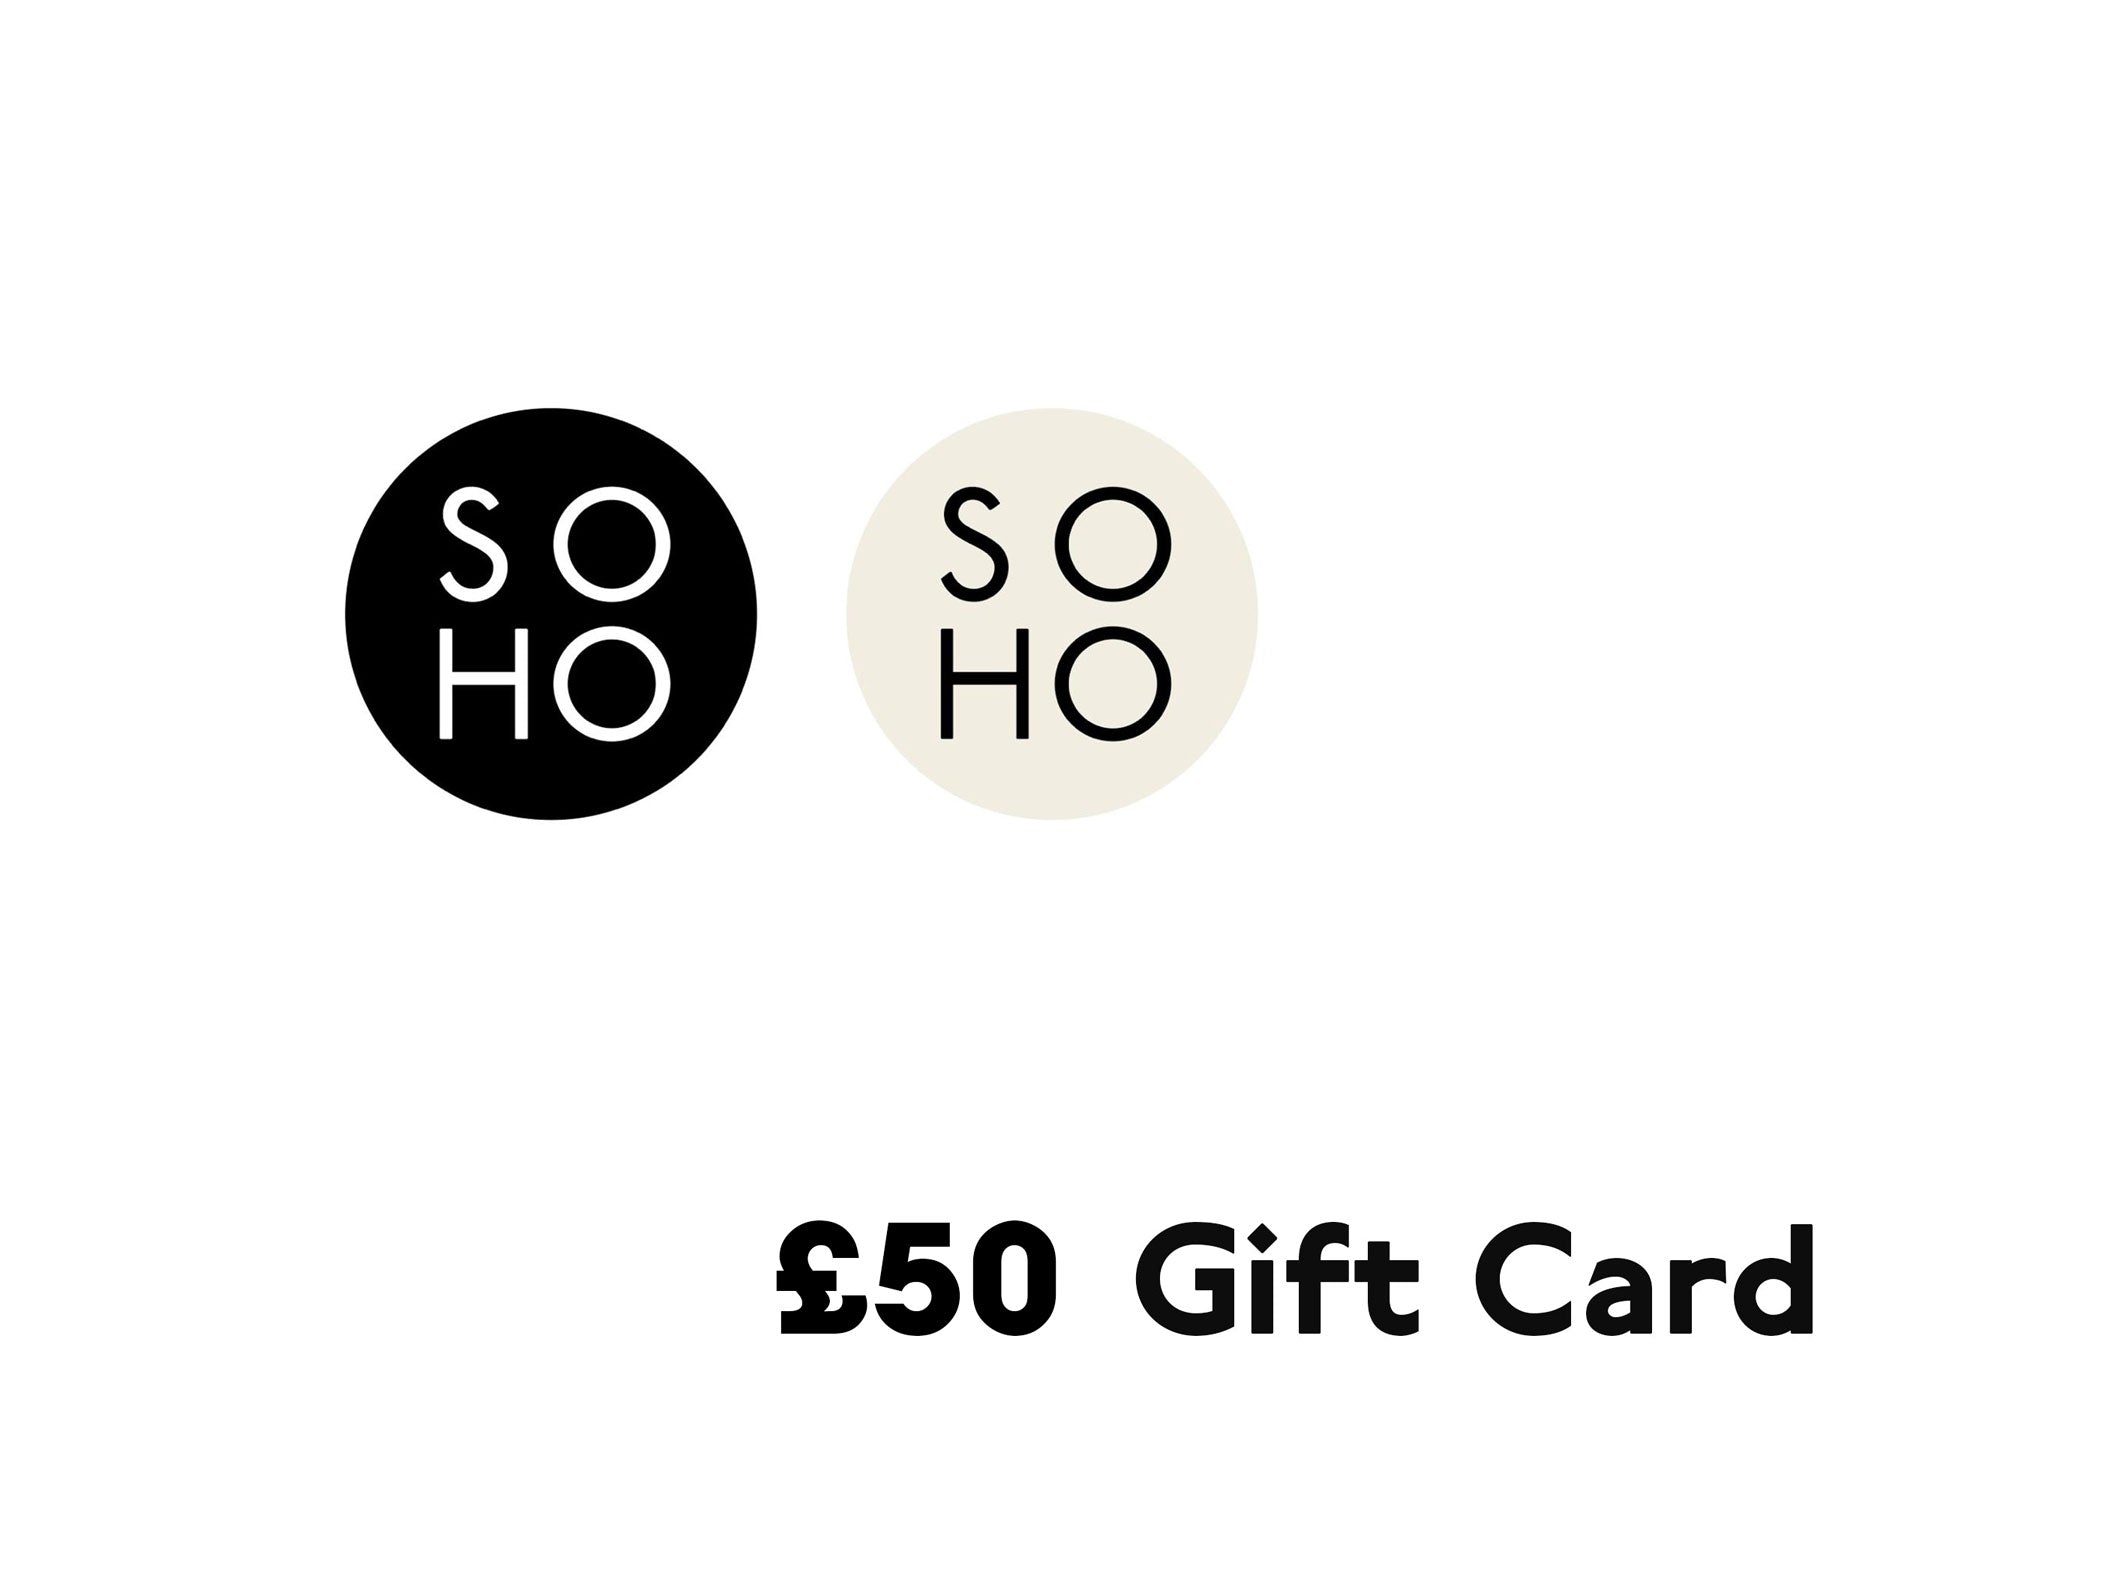 Generic graphic of SOHO Scarves gift card representing 50 GBP.